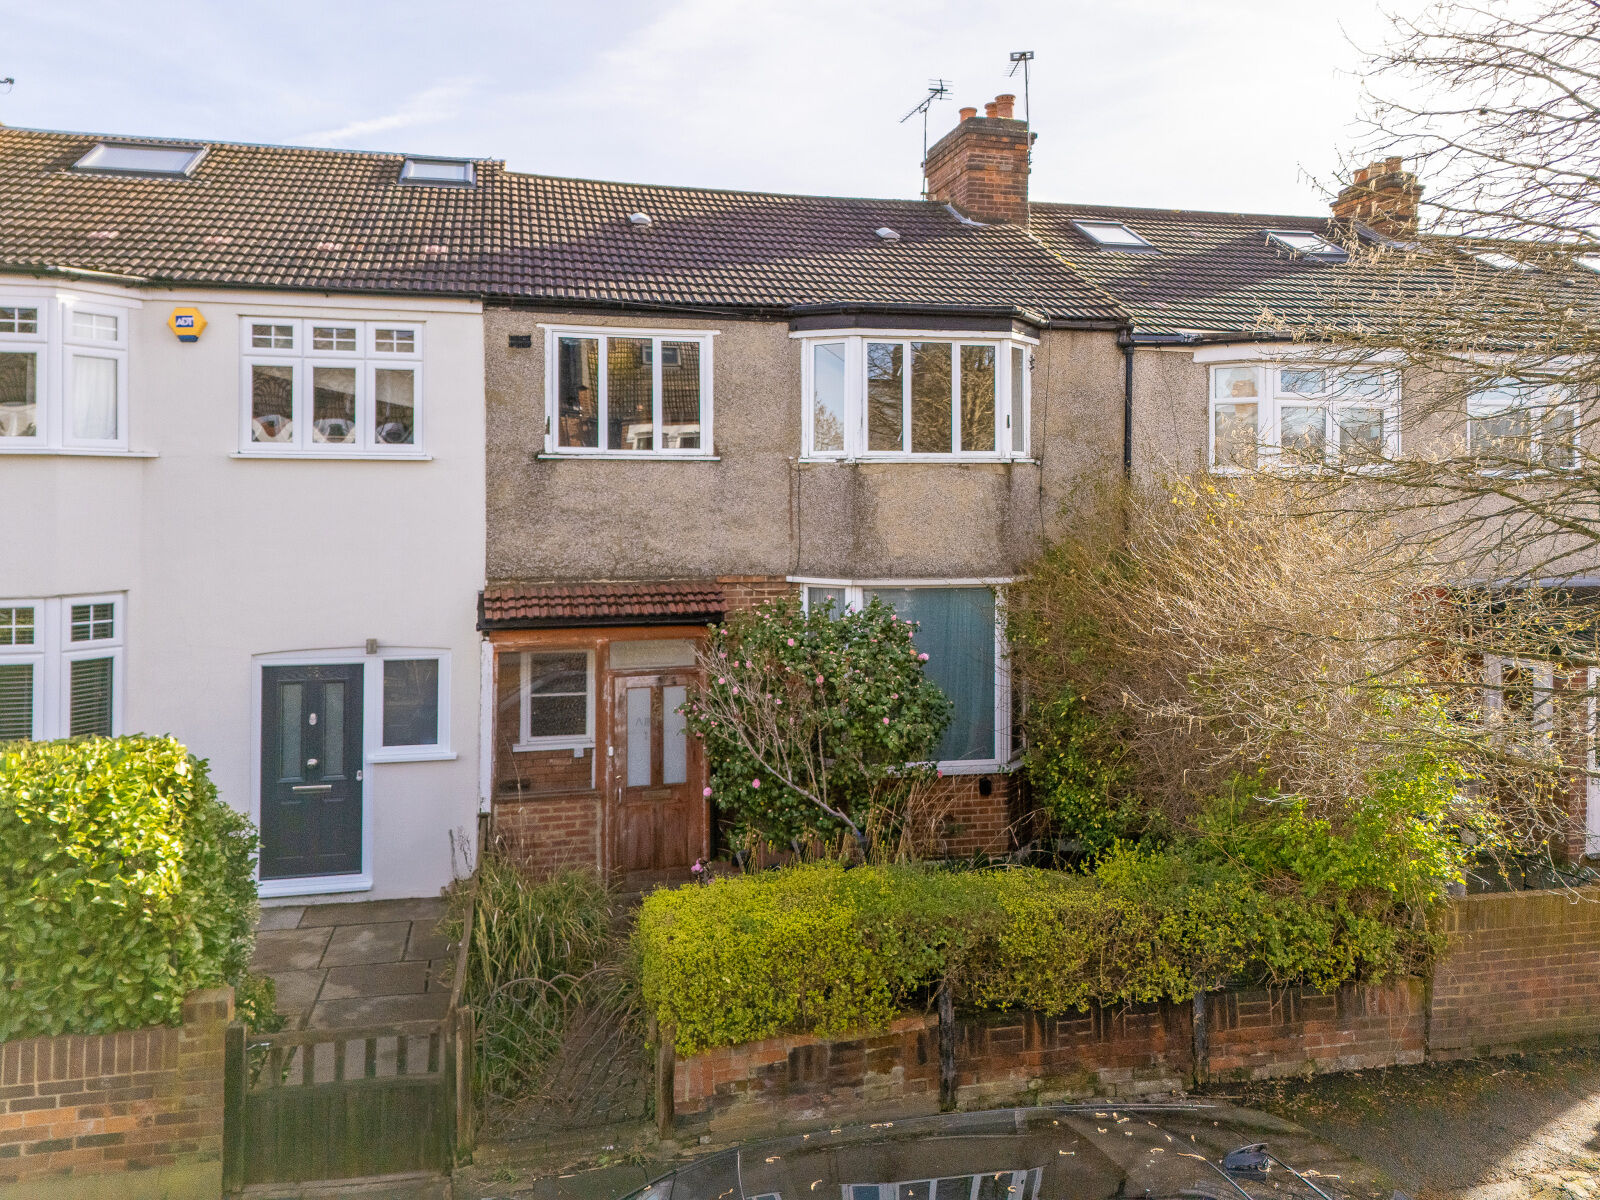 3 bedroom mid terraced house for sale Evelyn Road, Wimbledon, SW19, main image